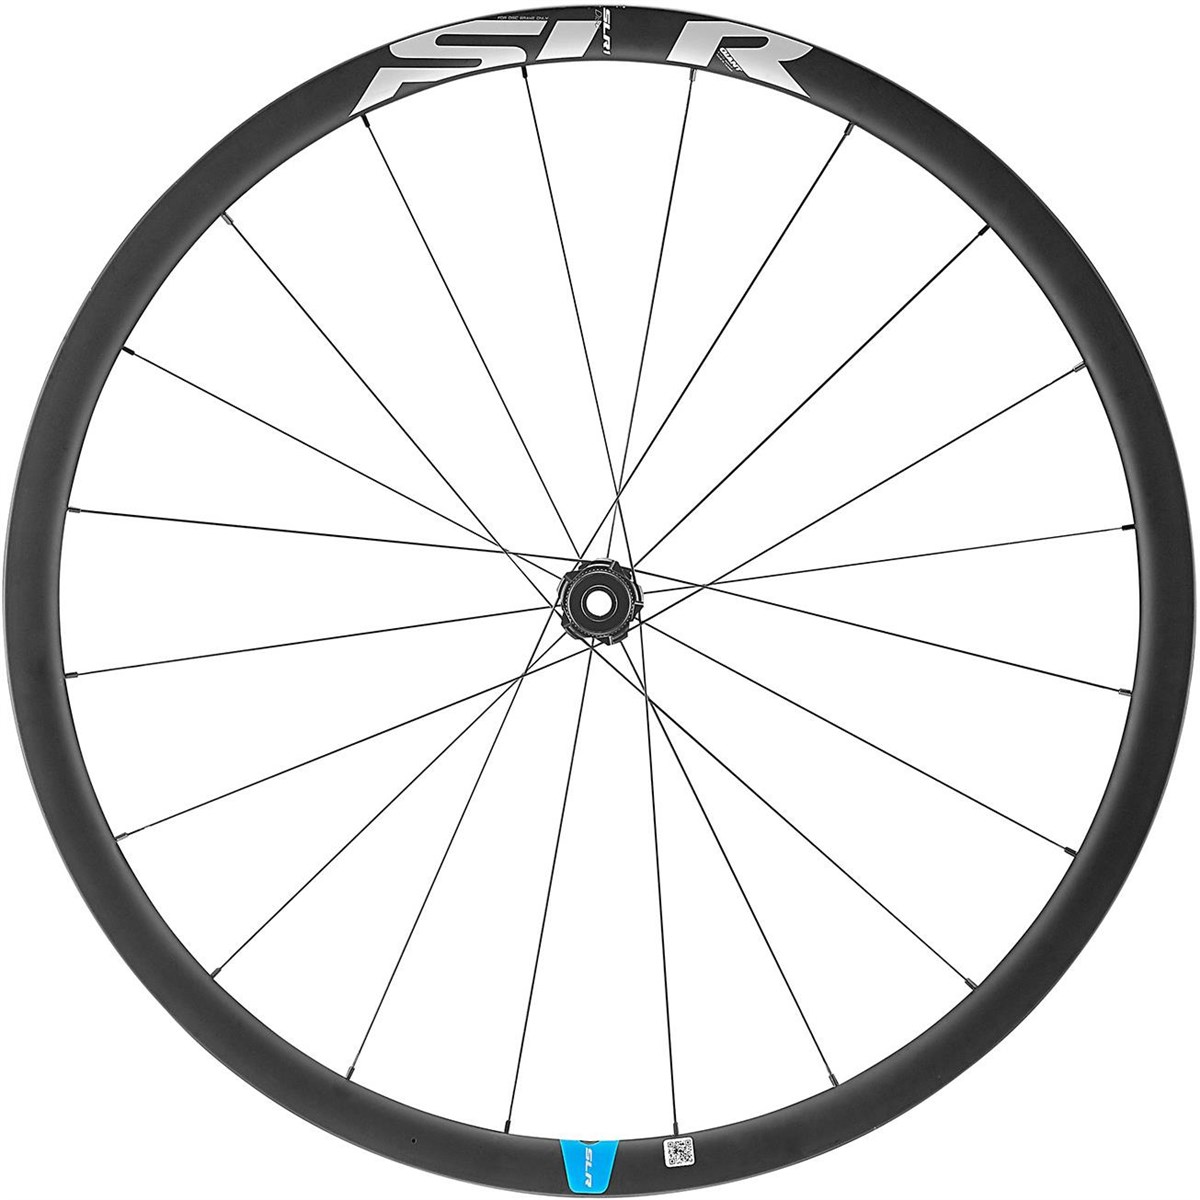 Giant SLR 0 Disc Centre-Lock Clincher 700c Road Wheels product image